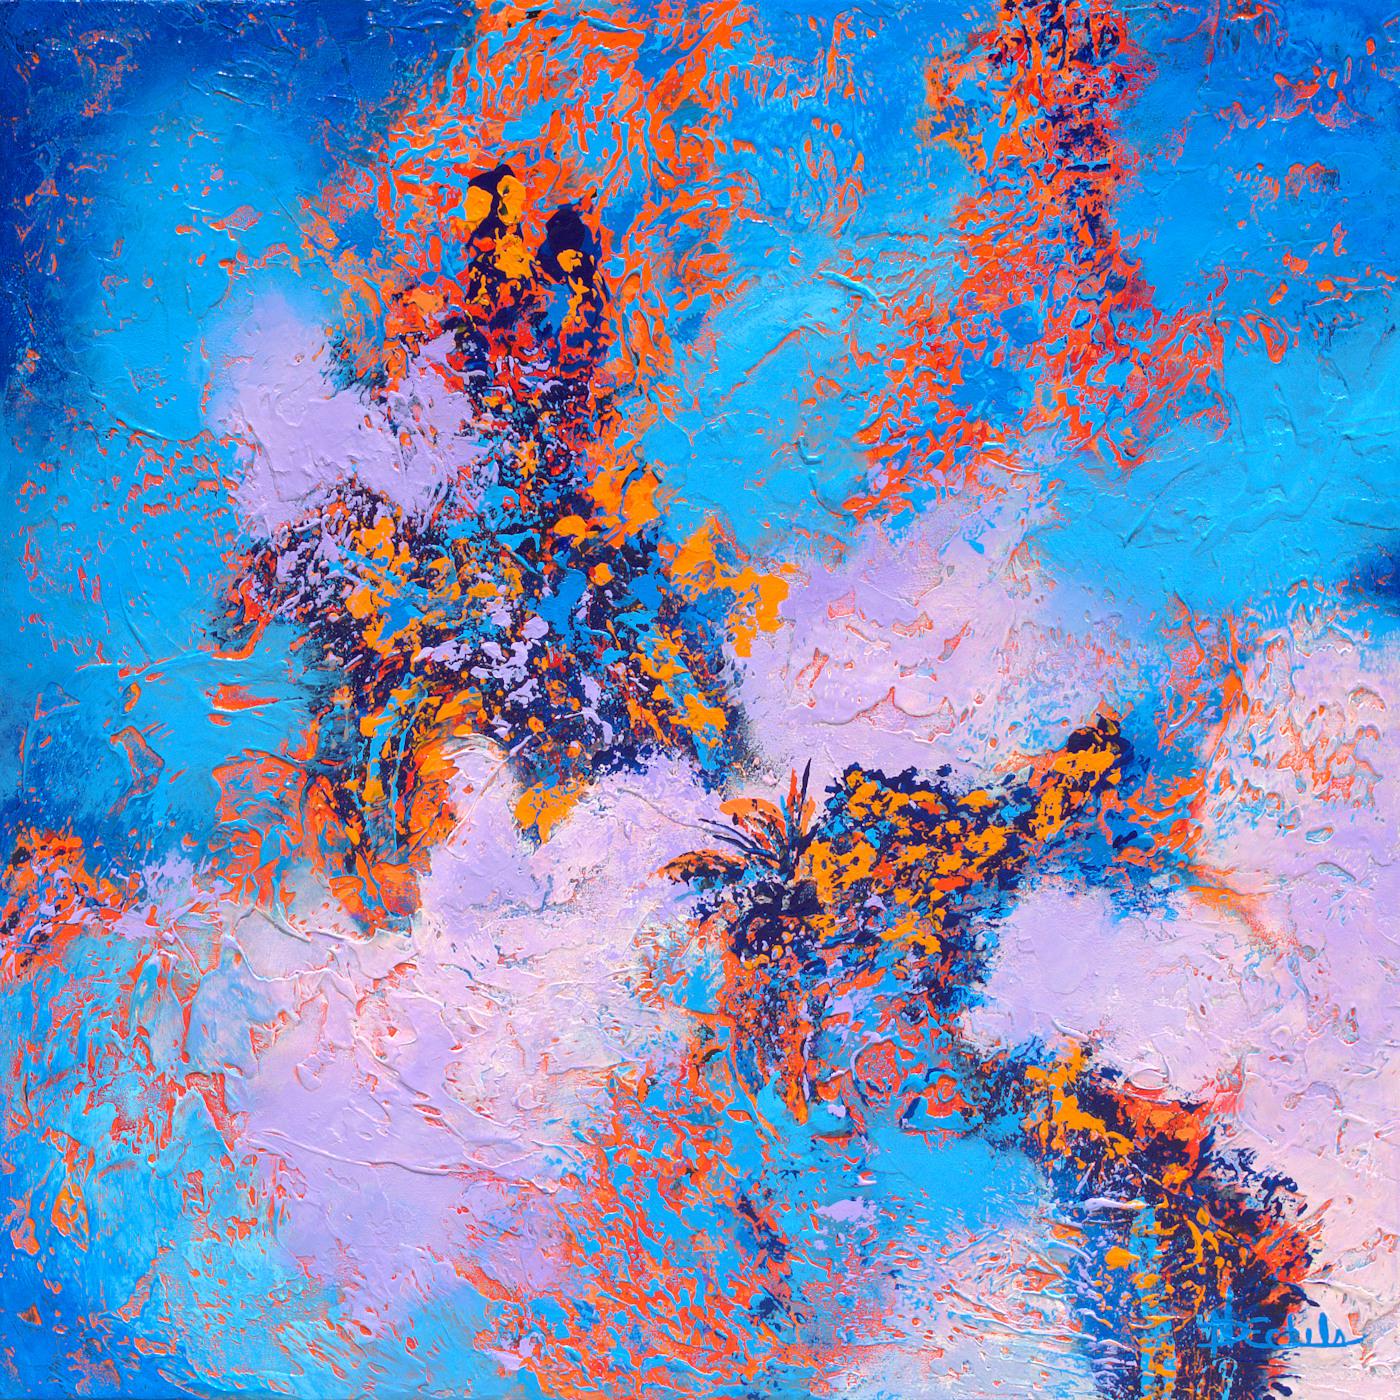 Nancy Eckels Abstract Painting - "Pop and Pastel" Mixed Media abstract with textural blues, orange, and lavender